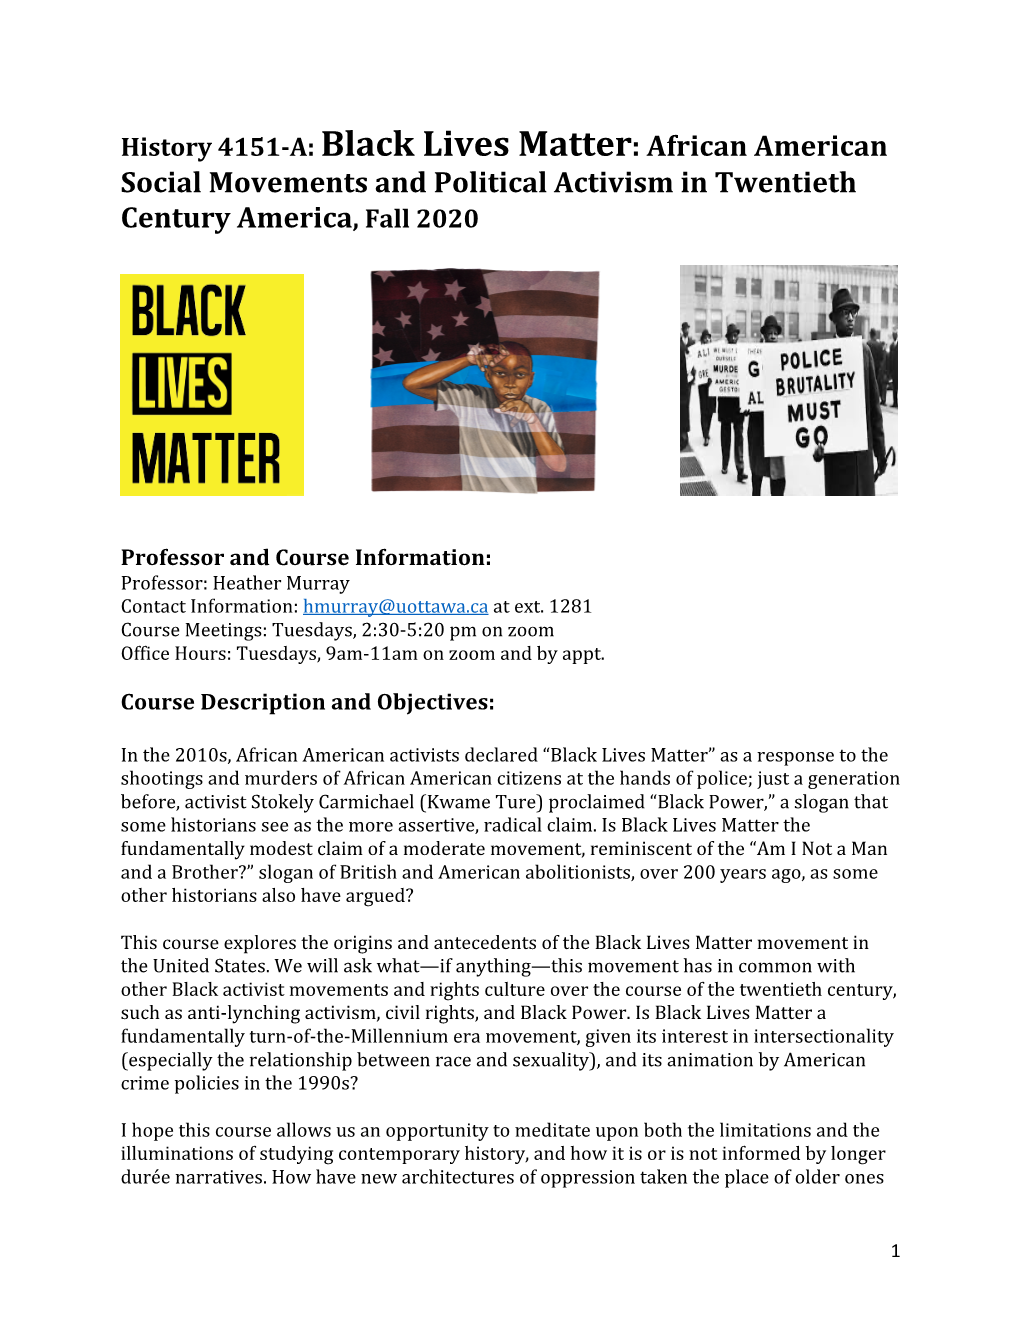 History 4151-A: Black Lives Matter: African American Social Movements and Political Activism in Twentieth Century America, Fall 2020